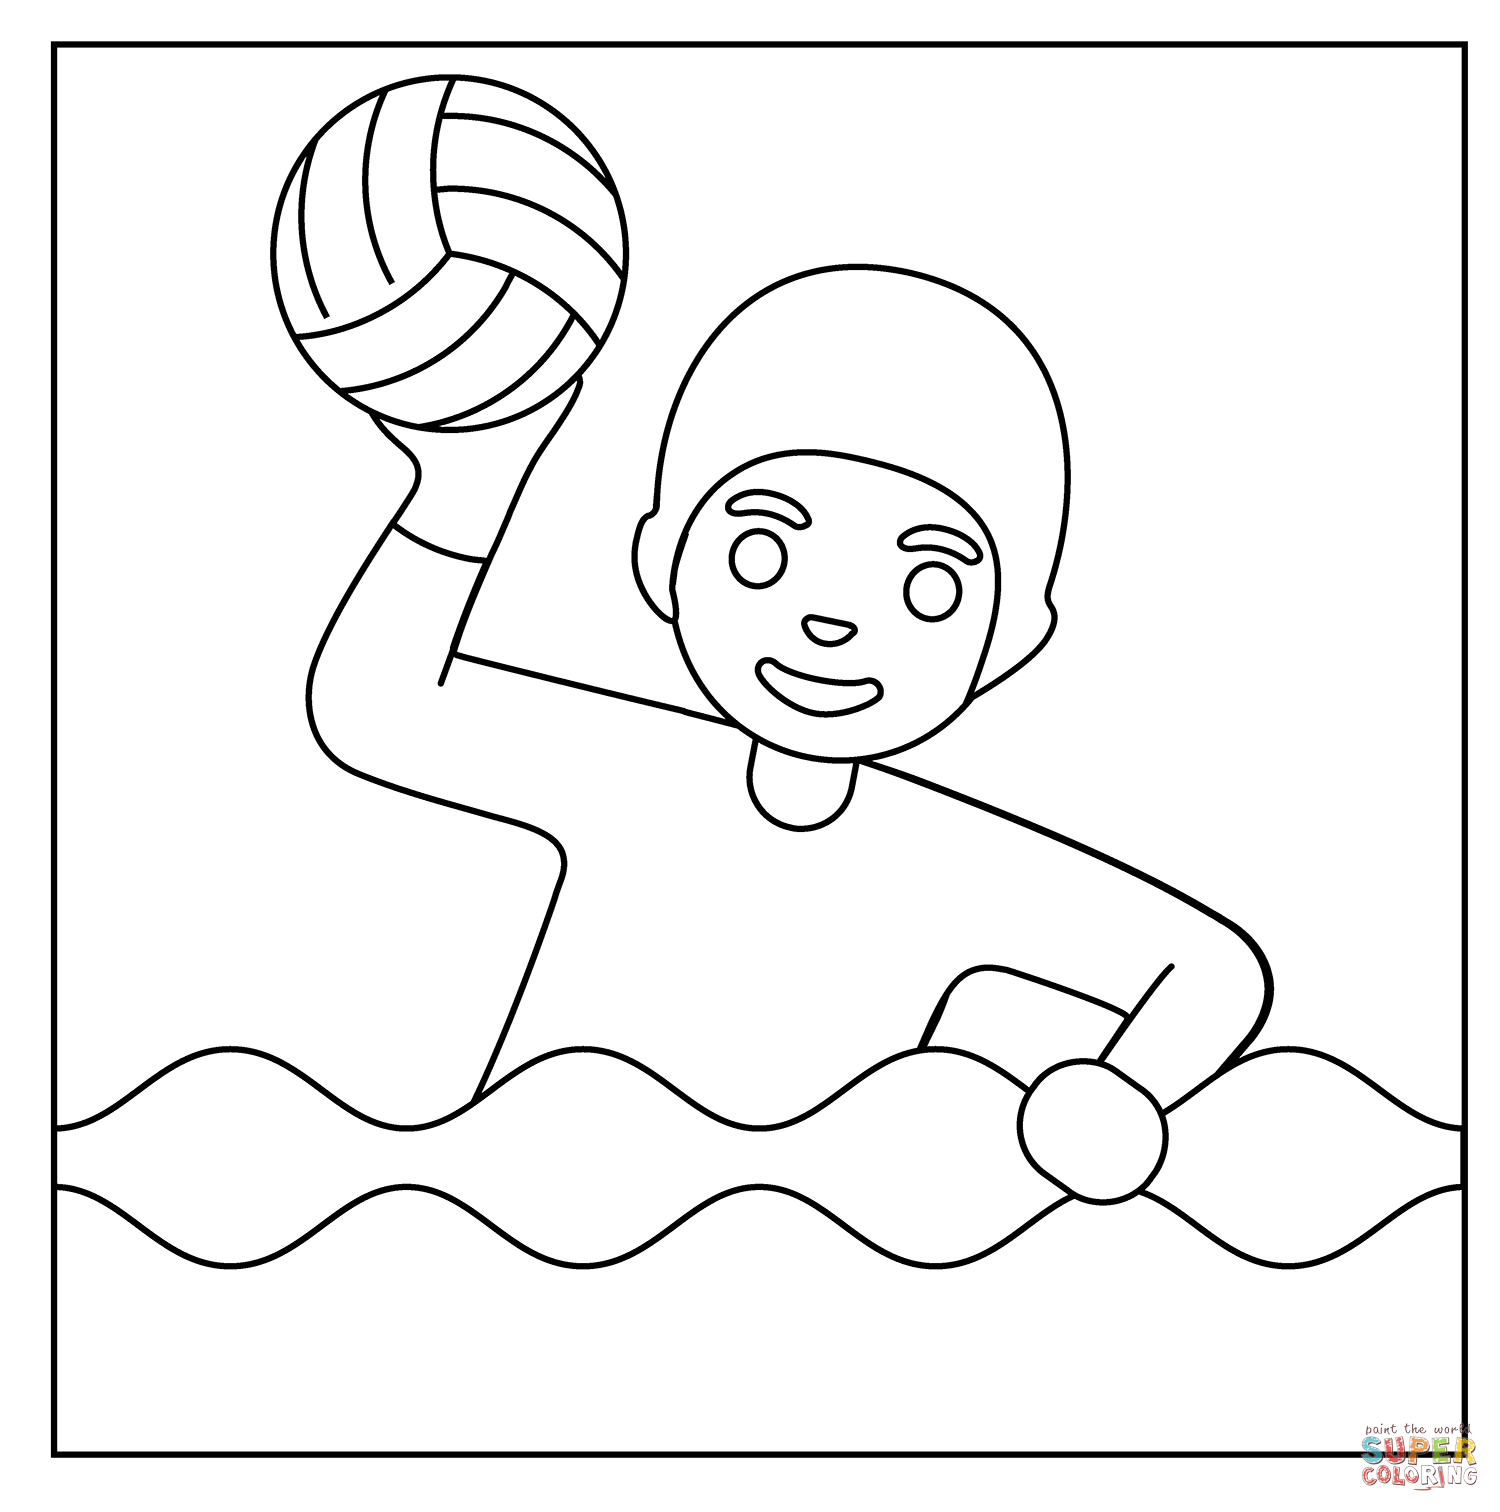 Person playing water polo emoji coloring page free printable coloring pages